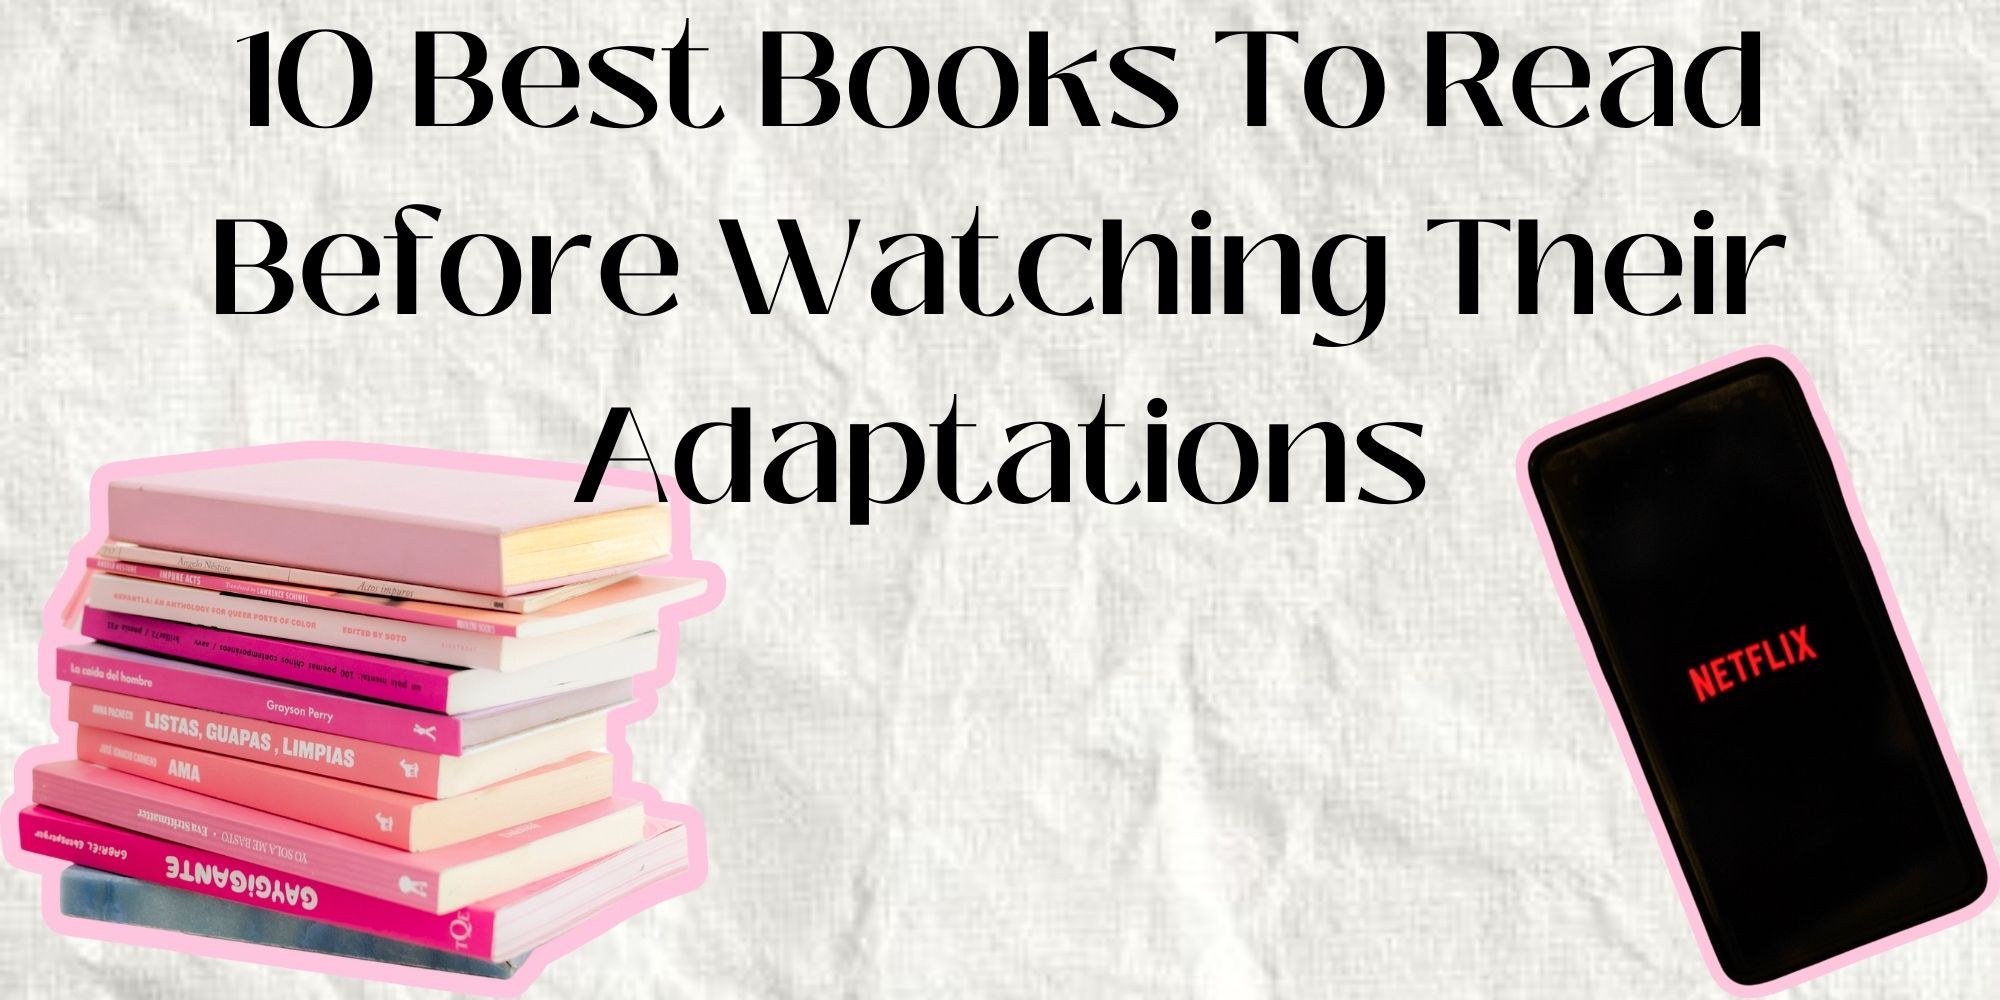 10 Best Books To Read Before Watching Their Adaptations